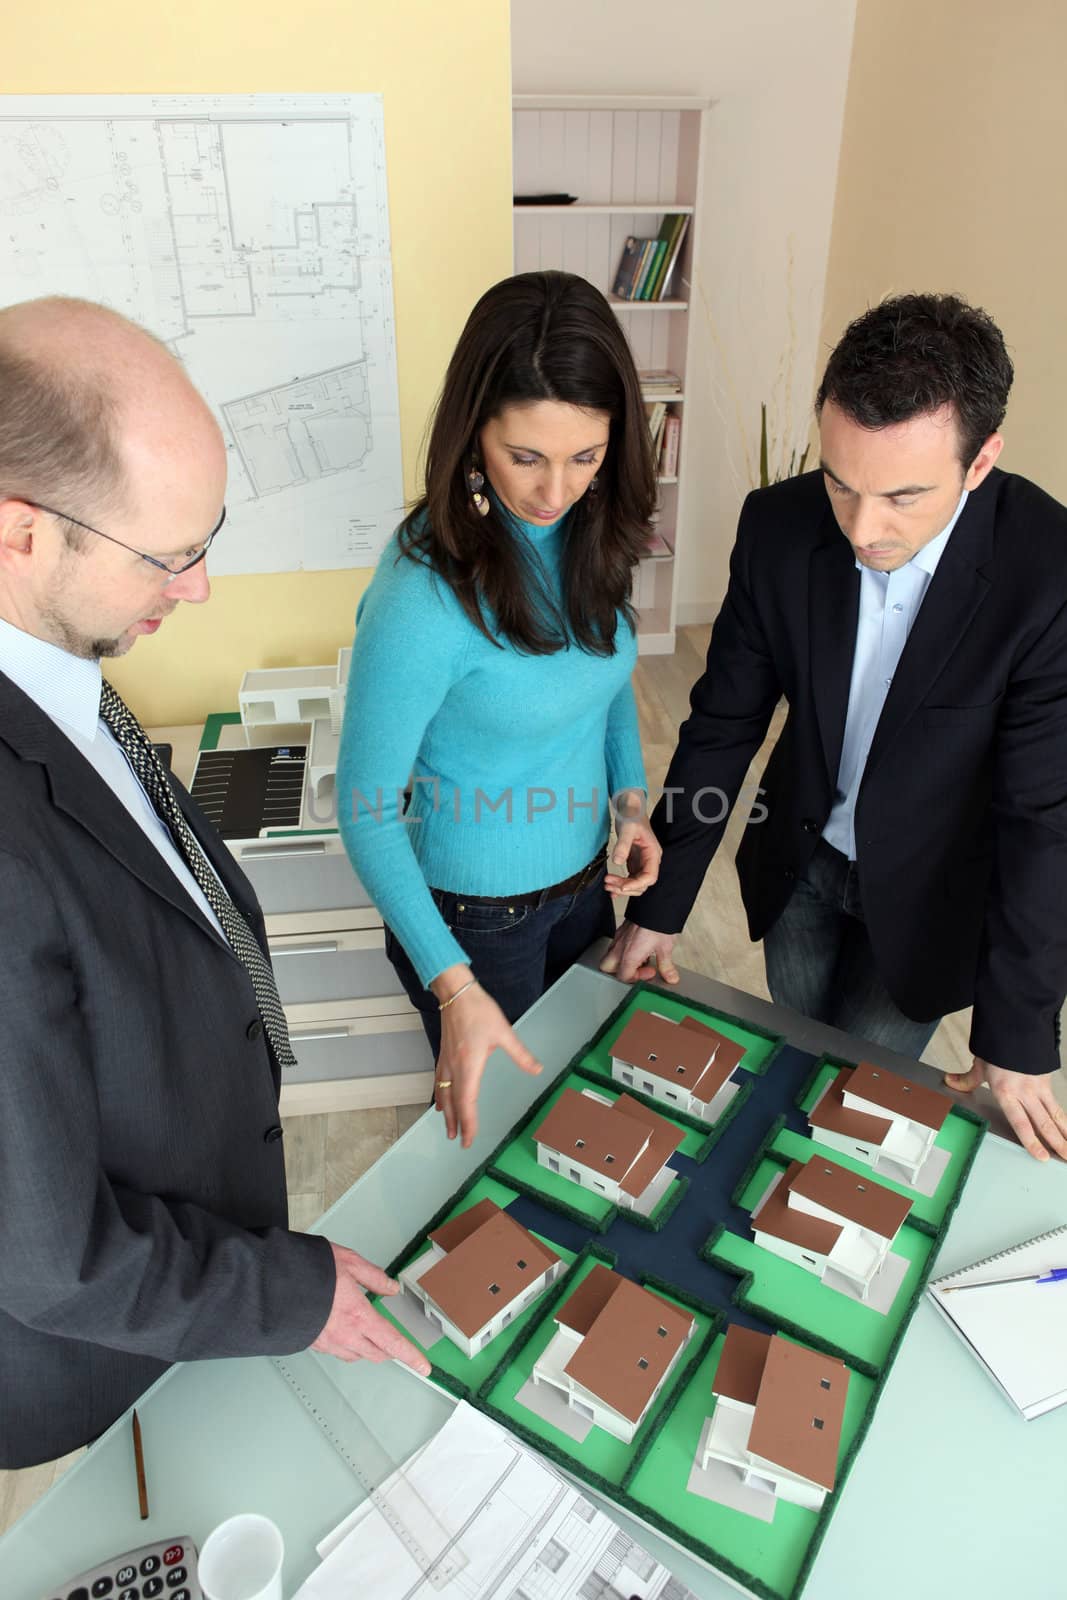 Architect with prospective buyers